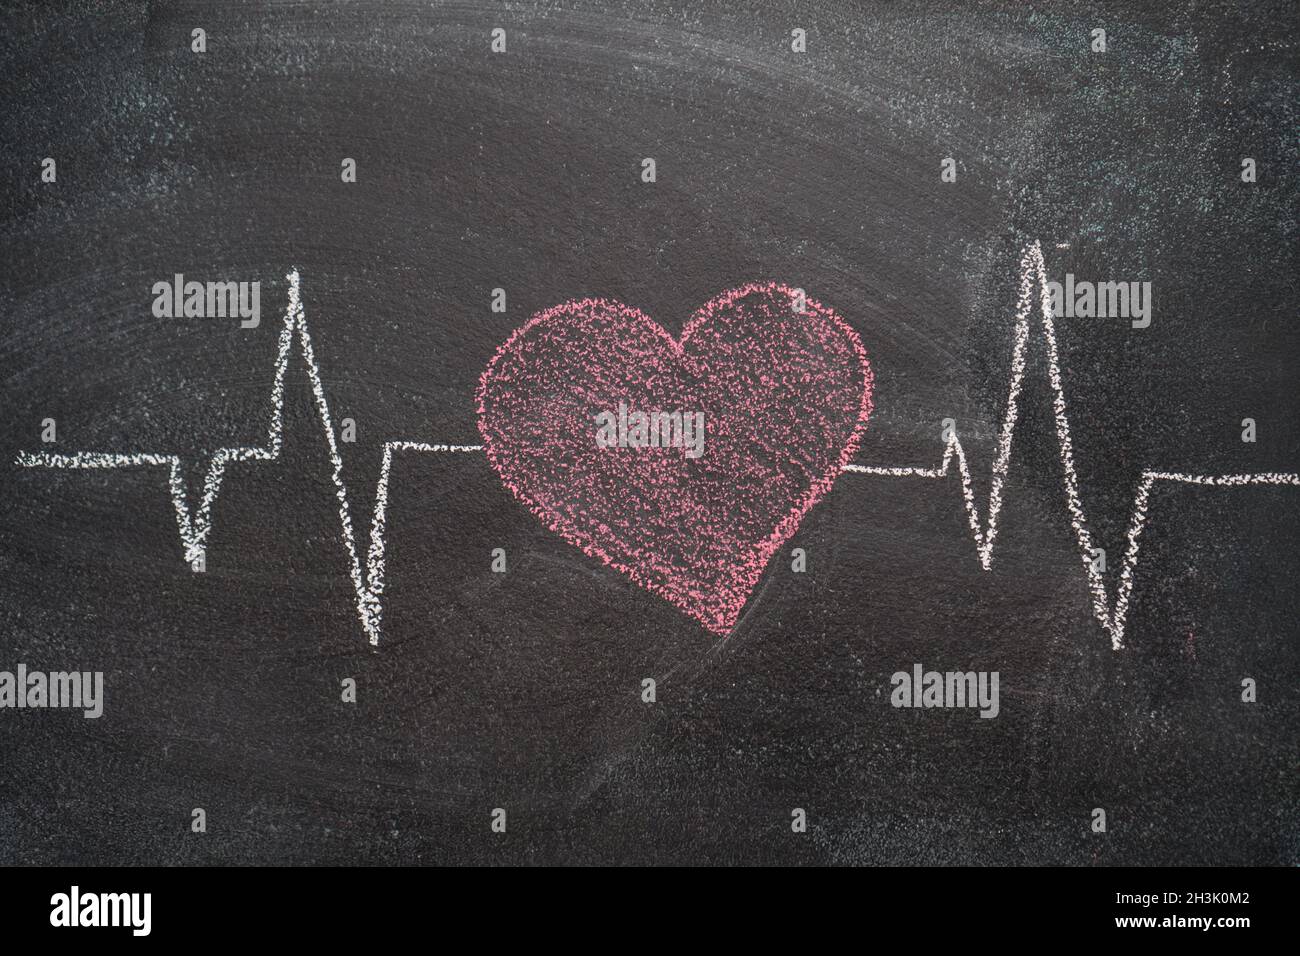 Heartbeat character and design on black chalkboard Stock Photo